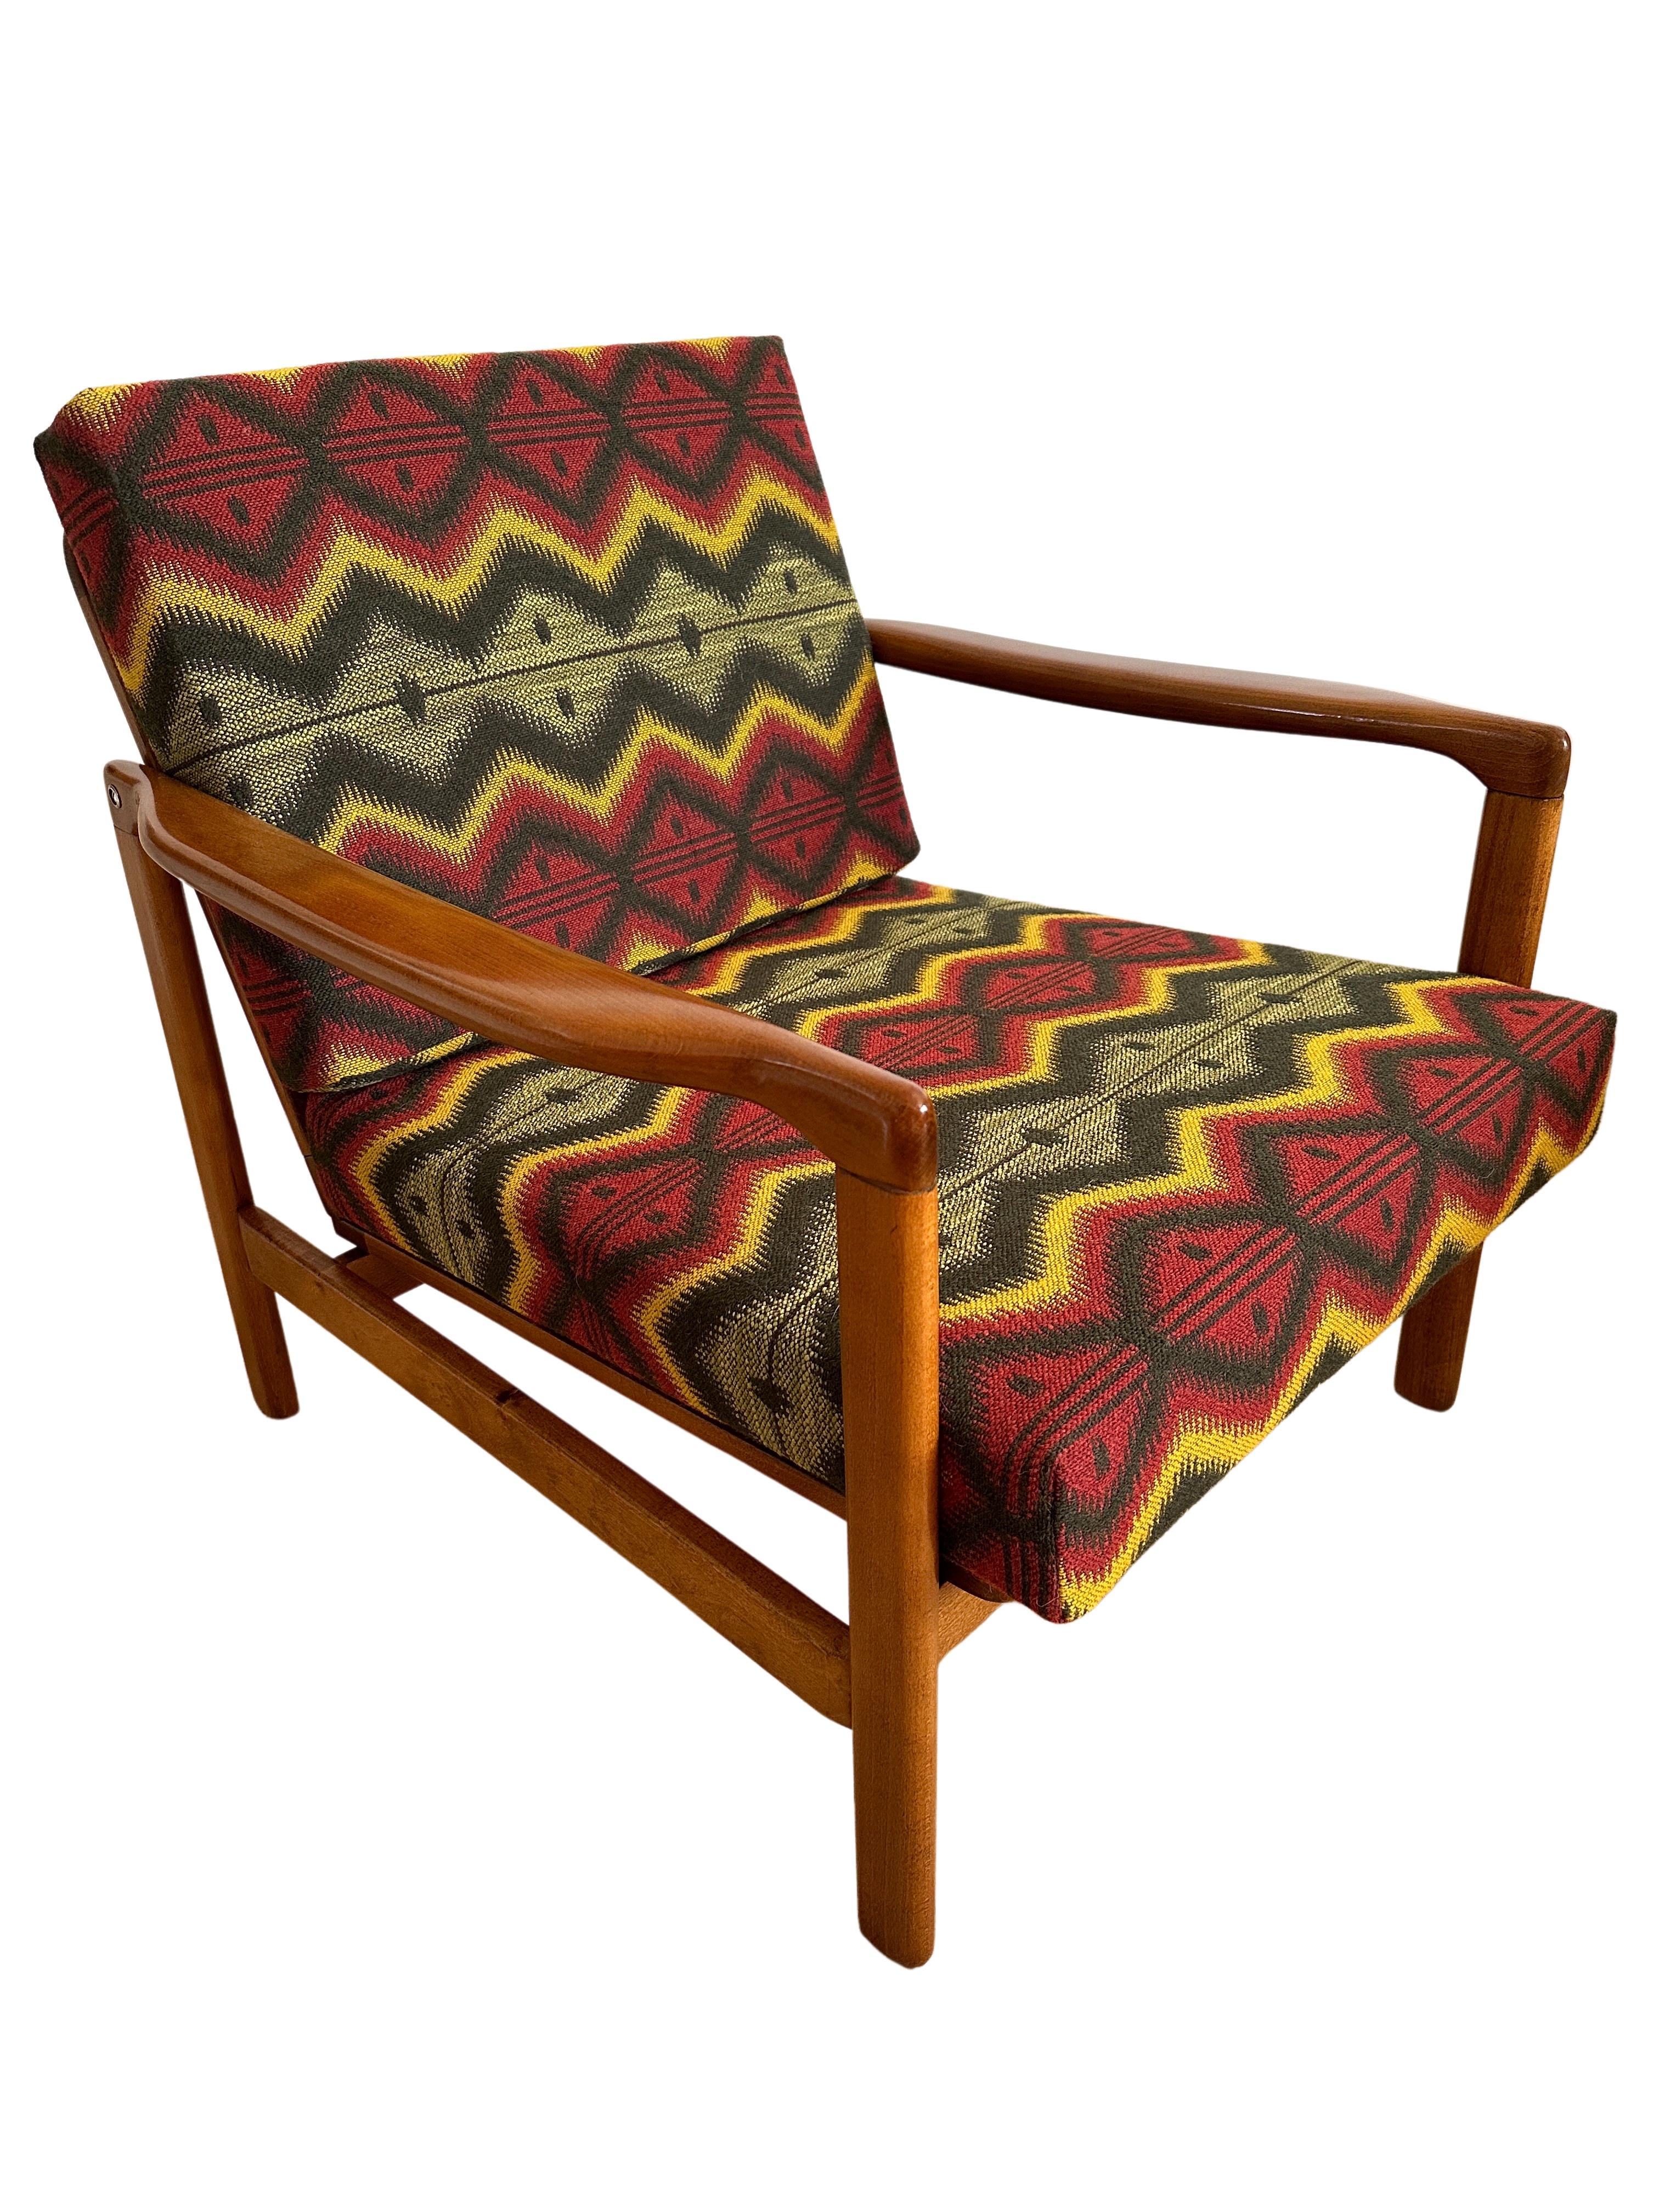 Set of Two Armchairs by Zenon Bączyk, Mind the Gap Upholstery, Europe, 1960s For Sale 6